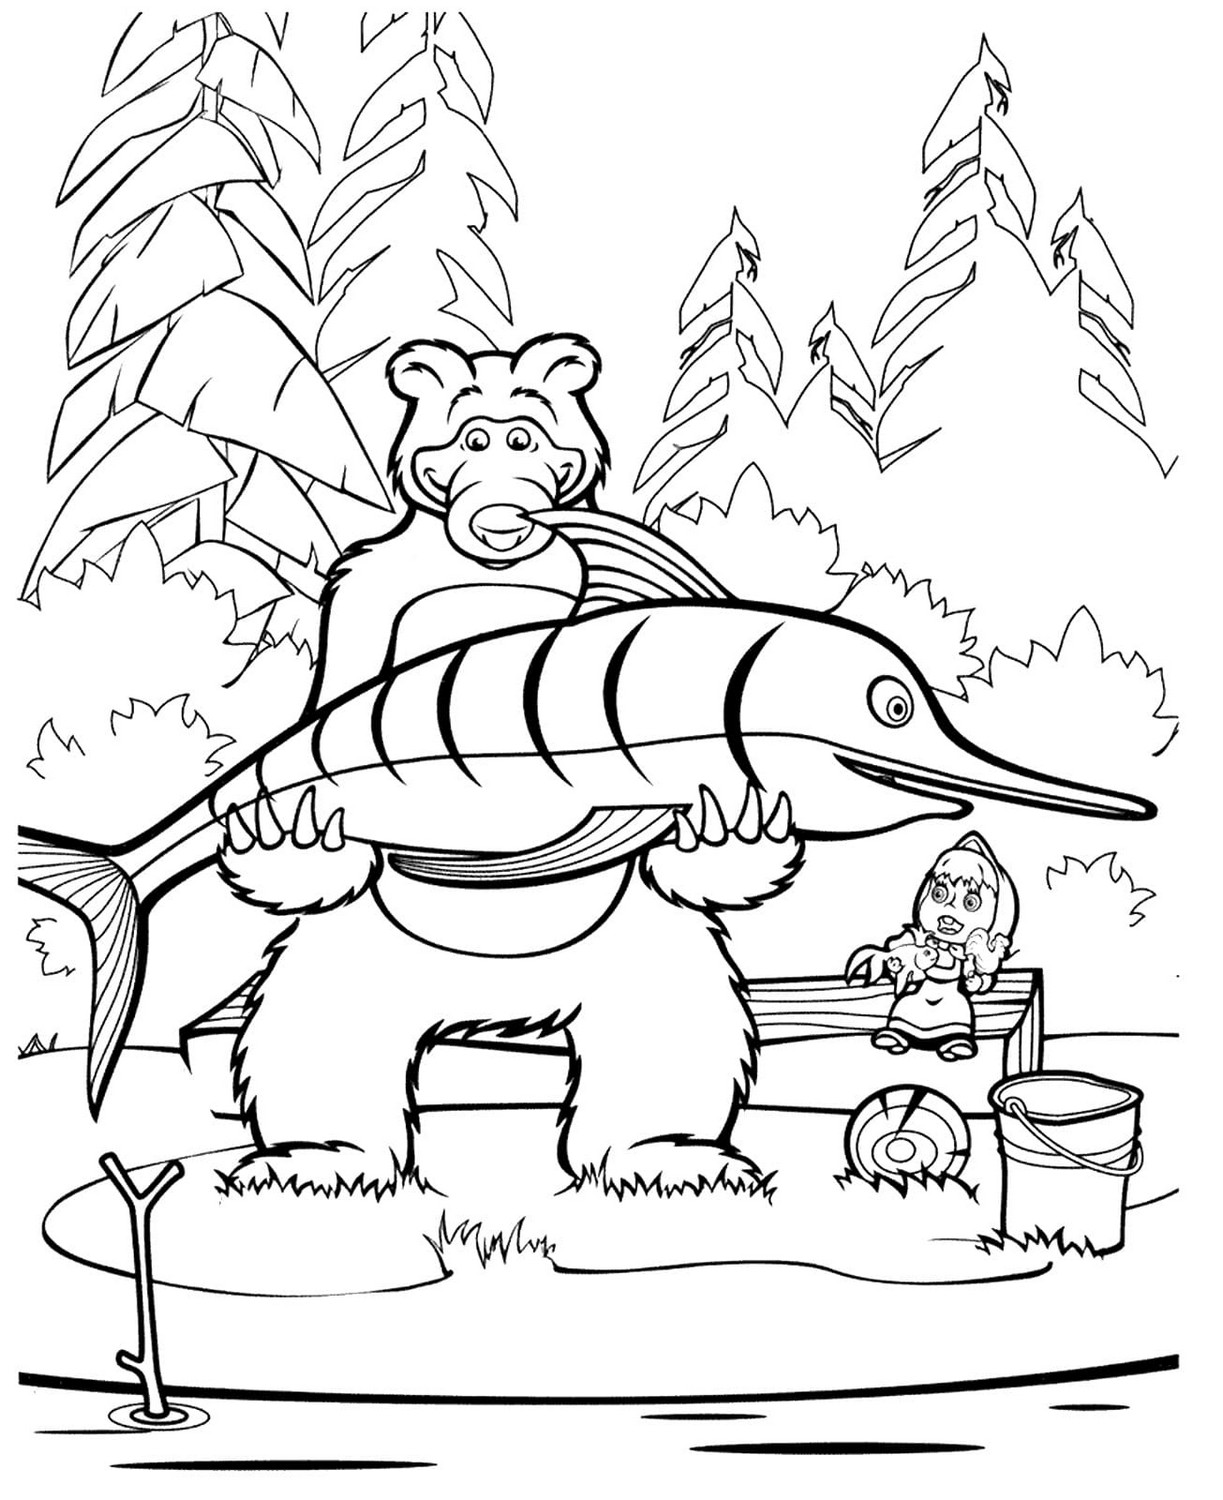 Masha and the Bear 30 drawing from Masha and the Bear to print and color